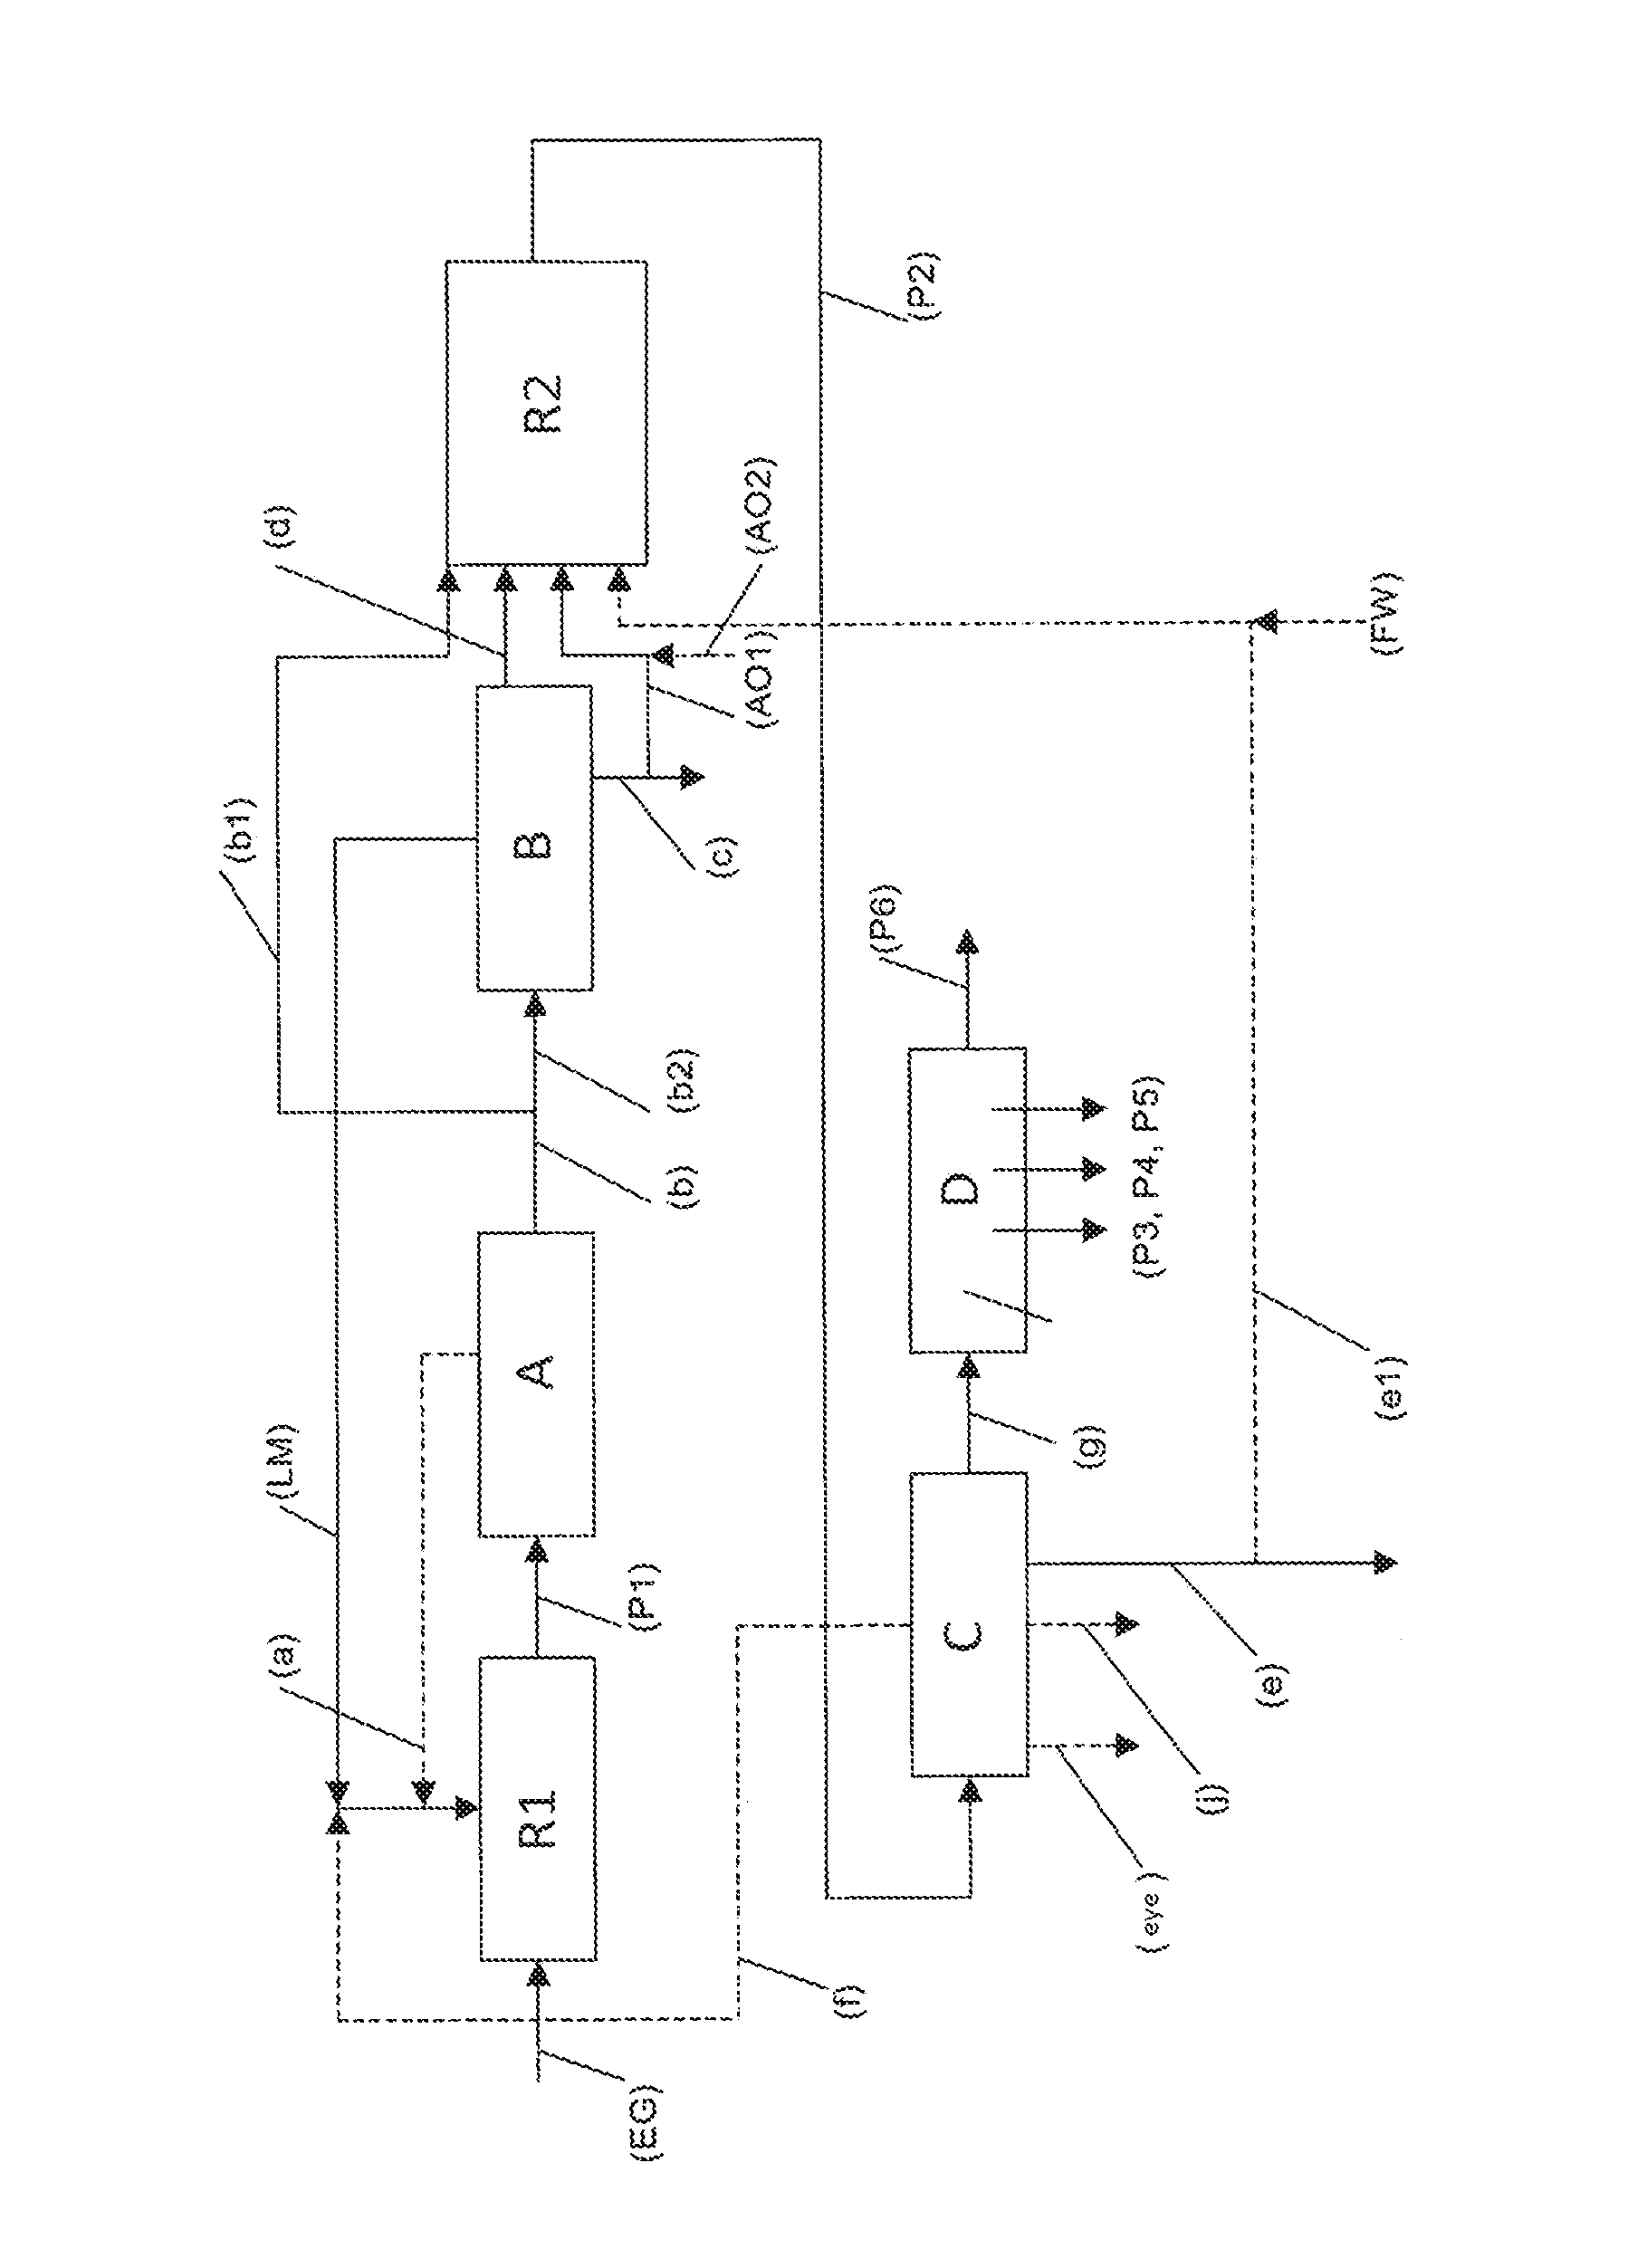 Method and device for producing alkylene oxides and alkylene glycols